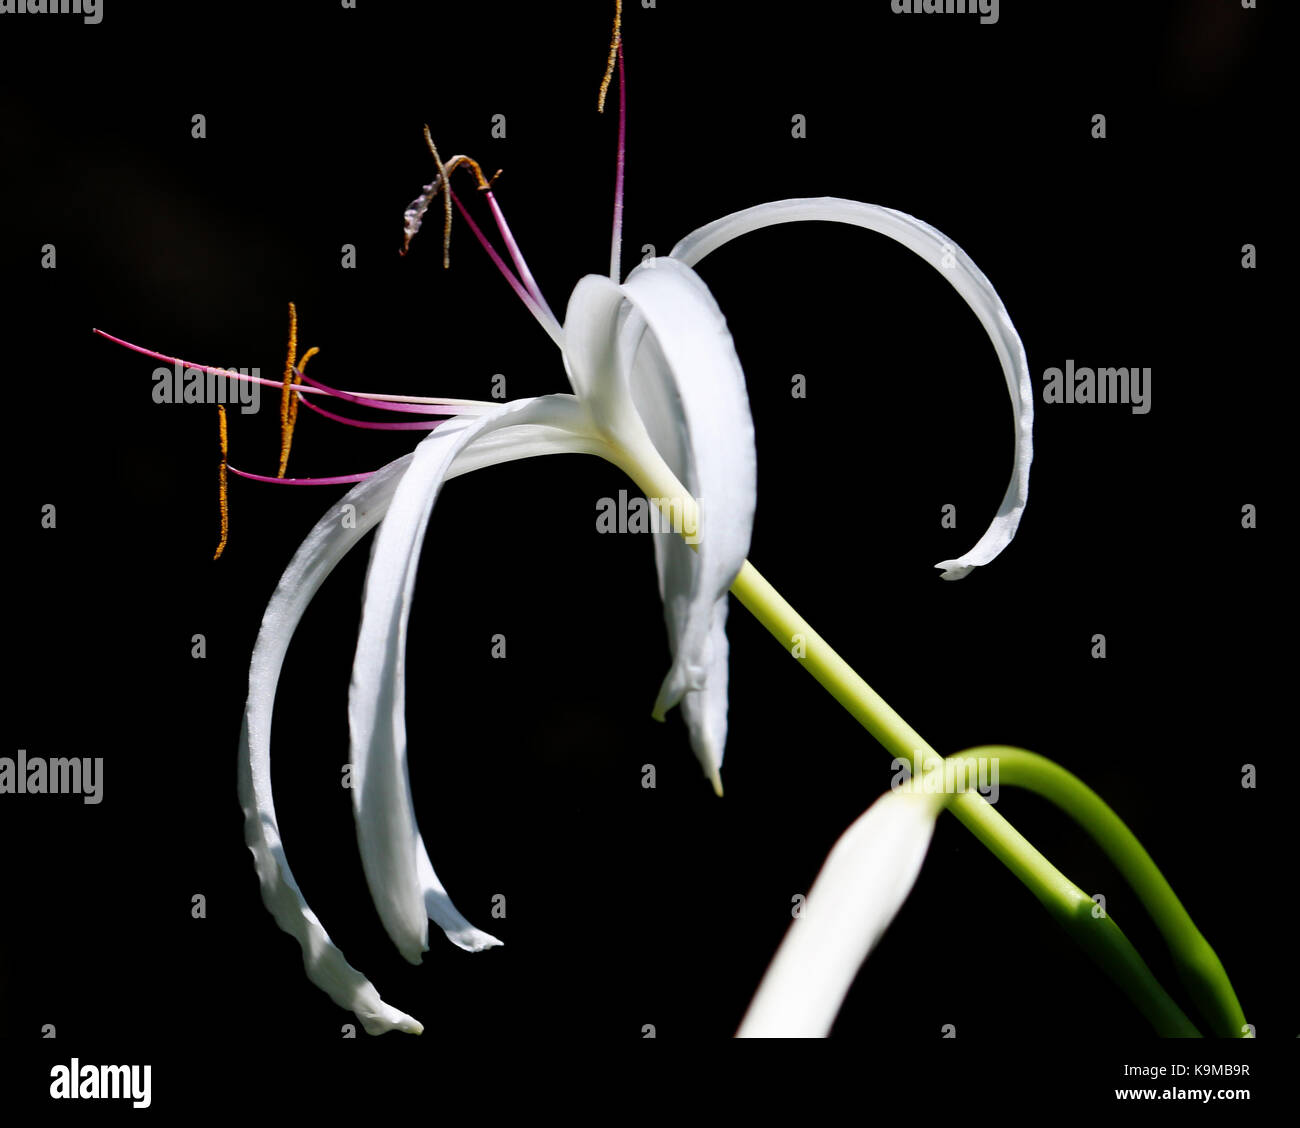 An isolated Queen Emma / Crinum Lily Flower with a black background Stock Photo